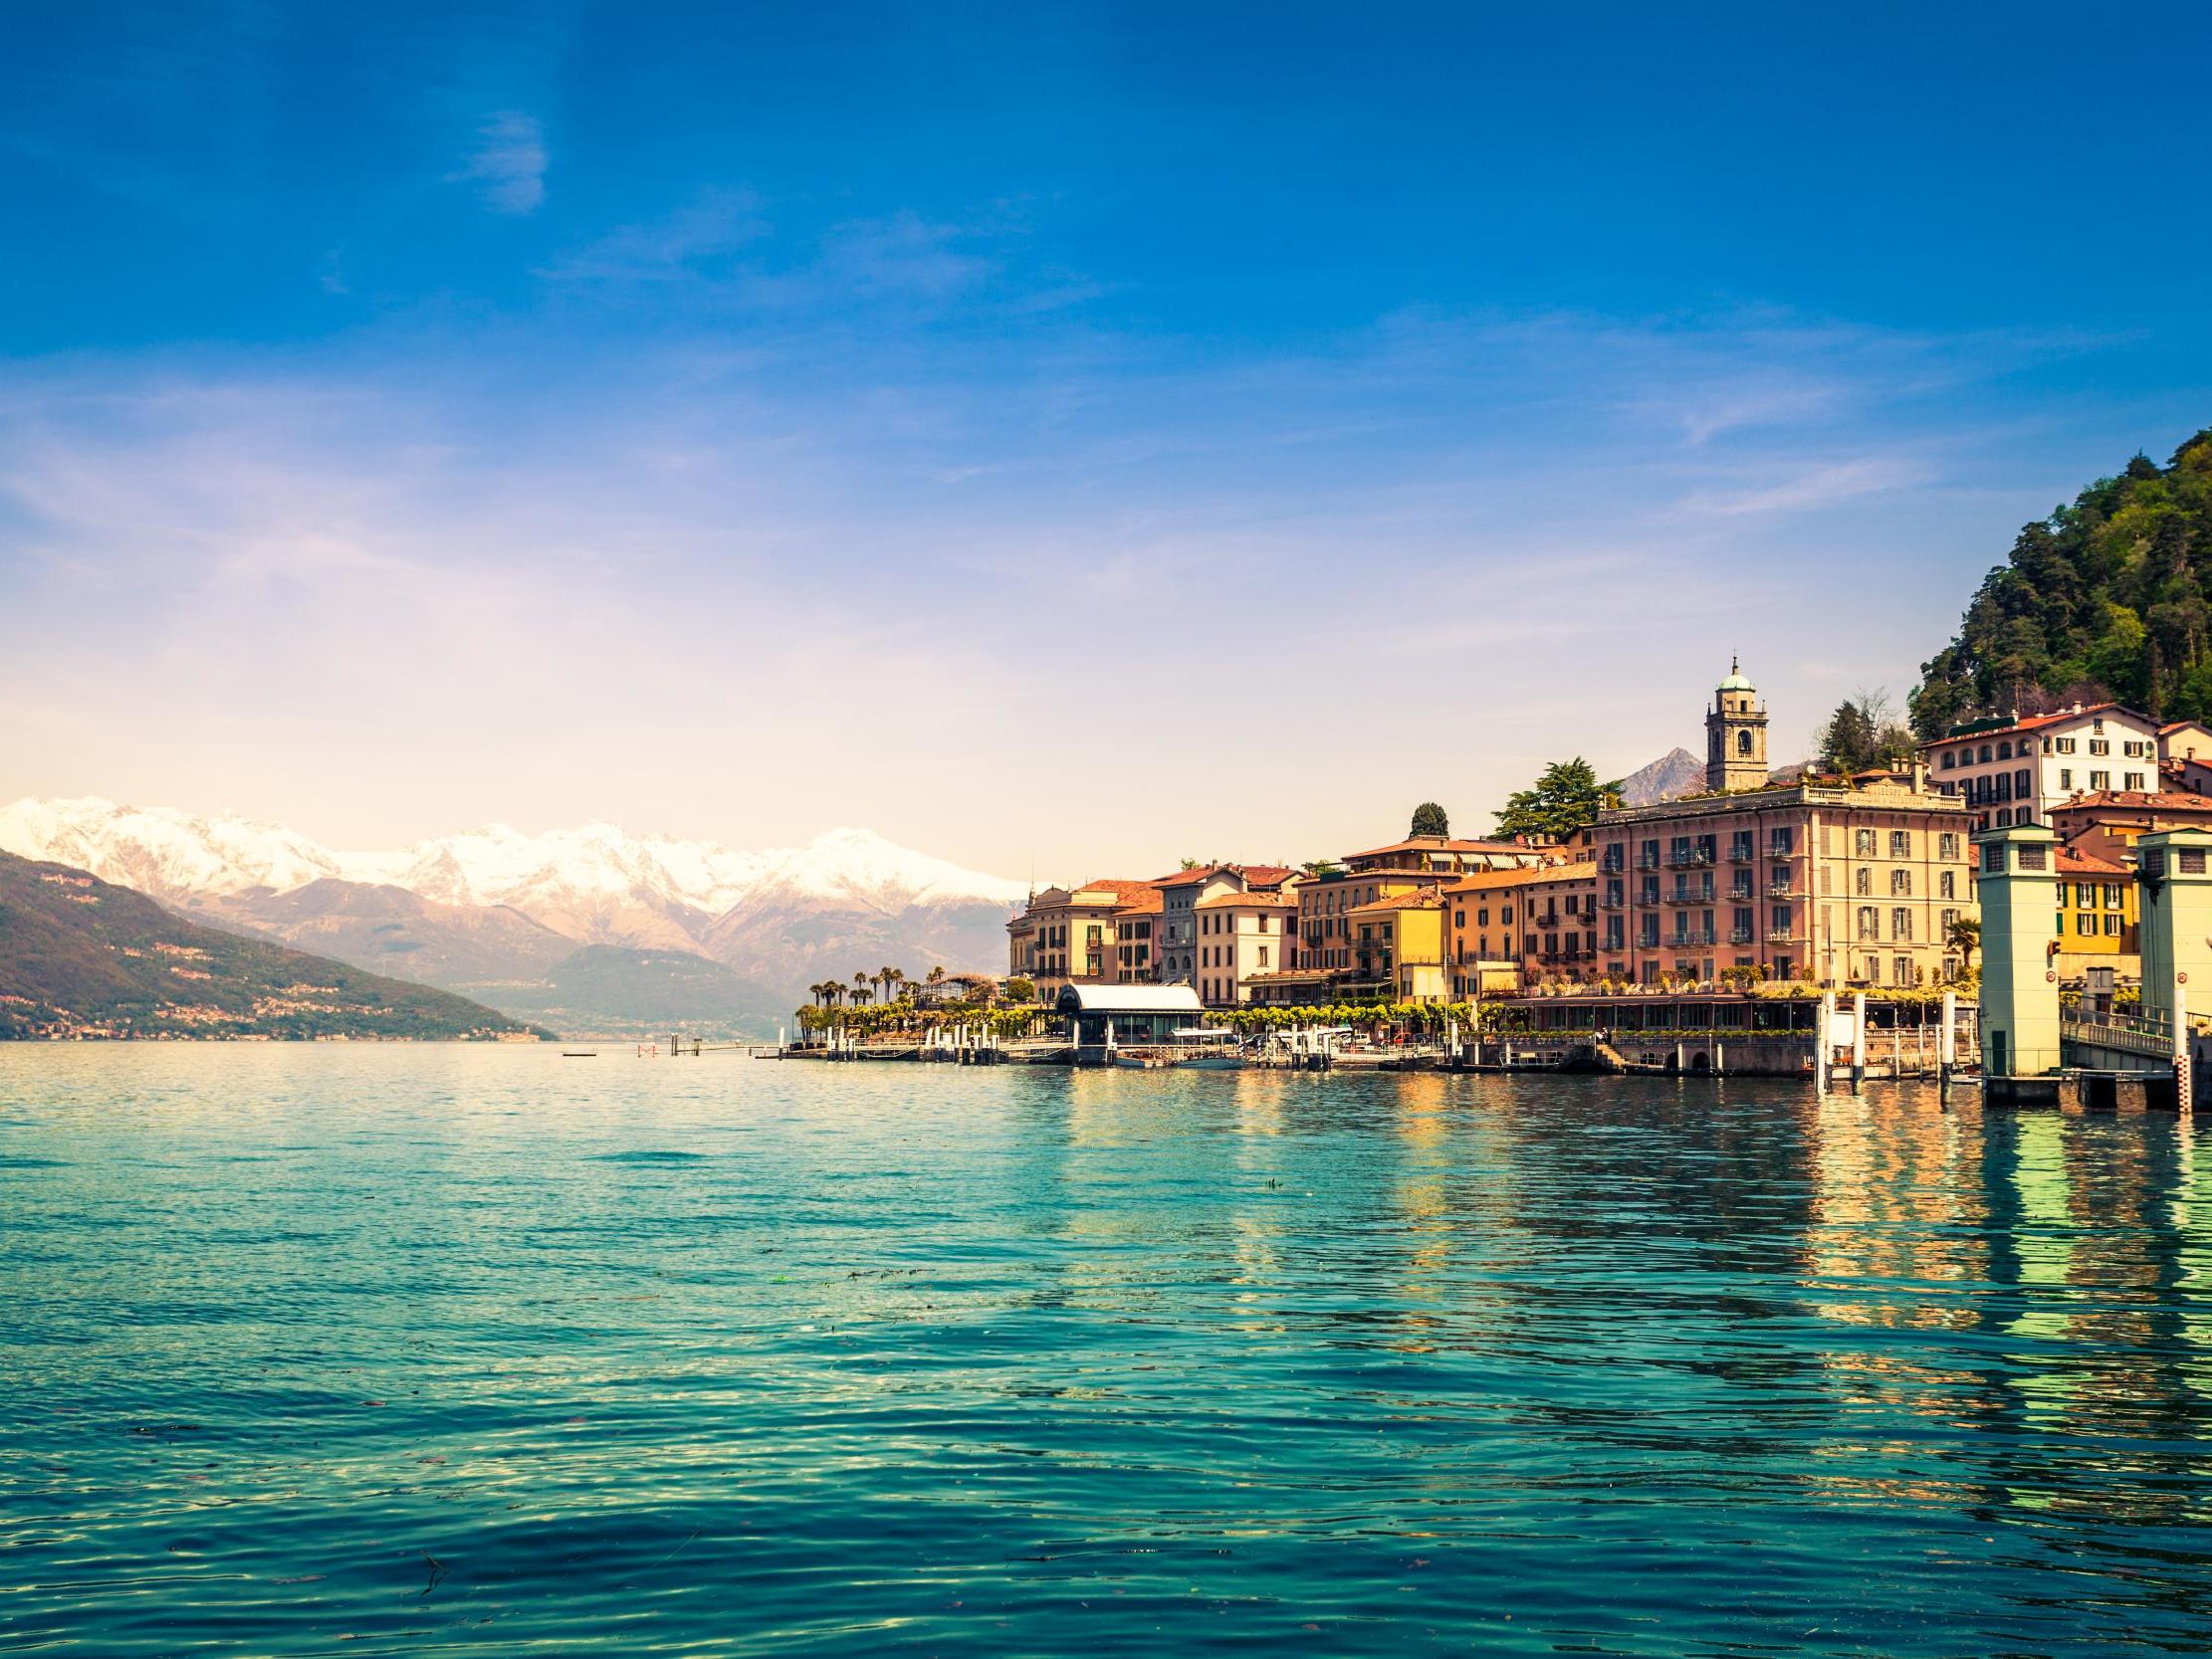 Northern heights: one of today’s readers is considering a trip to Lake Como